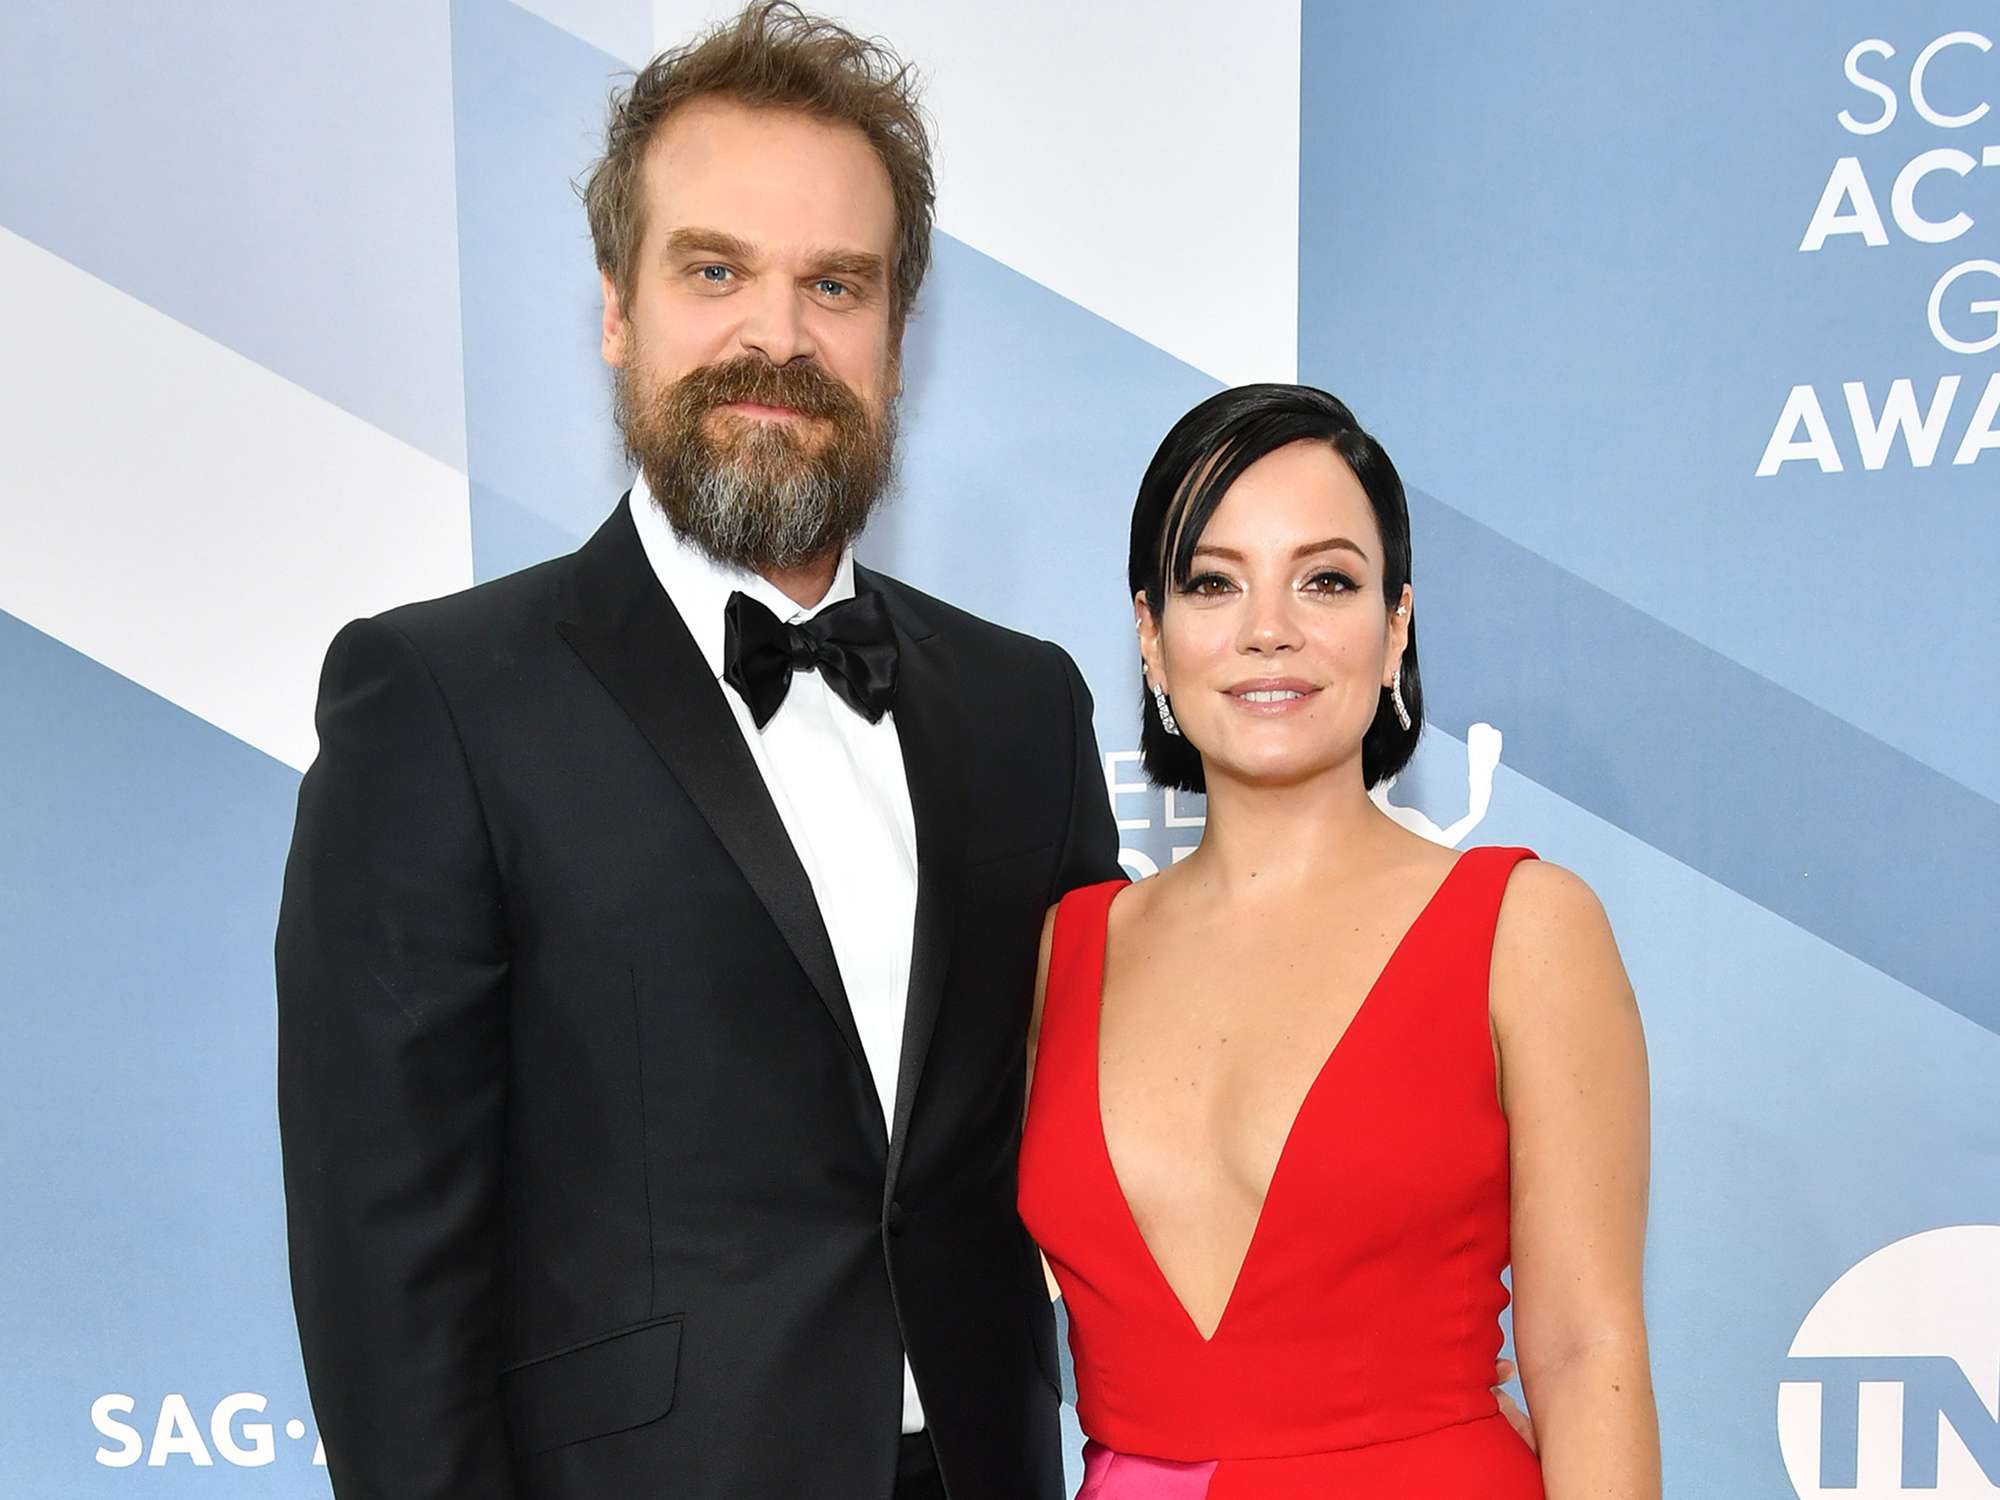 Lily Allen Says Her Husband David Harbour Controls What Apps She Has on Her Phone